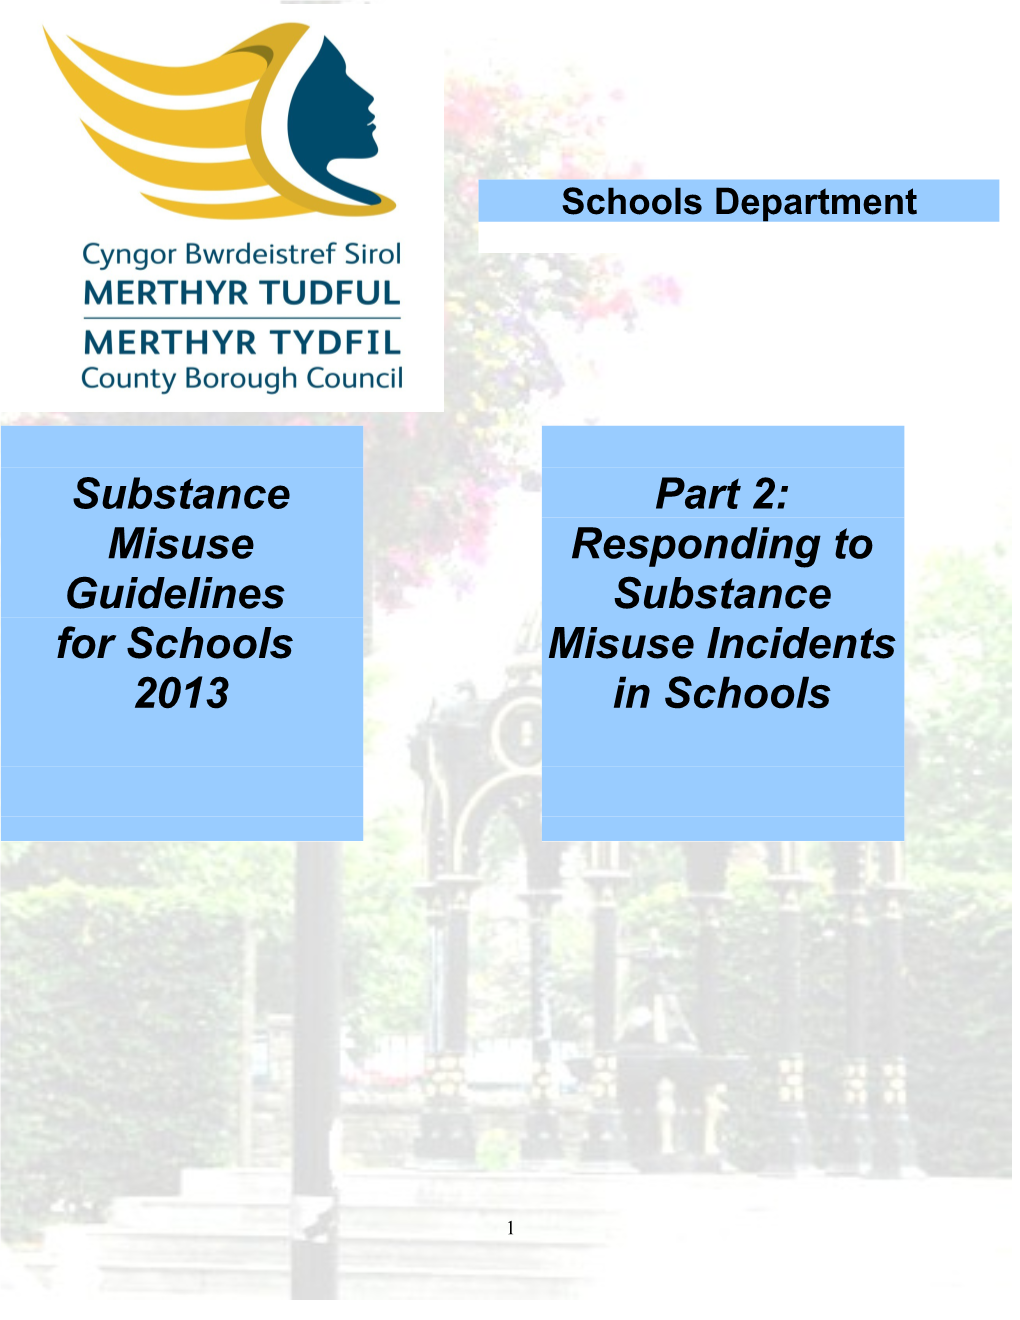 Responding to Substance Misuse Incidents in Schools